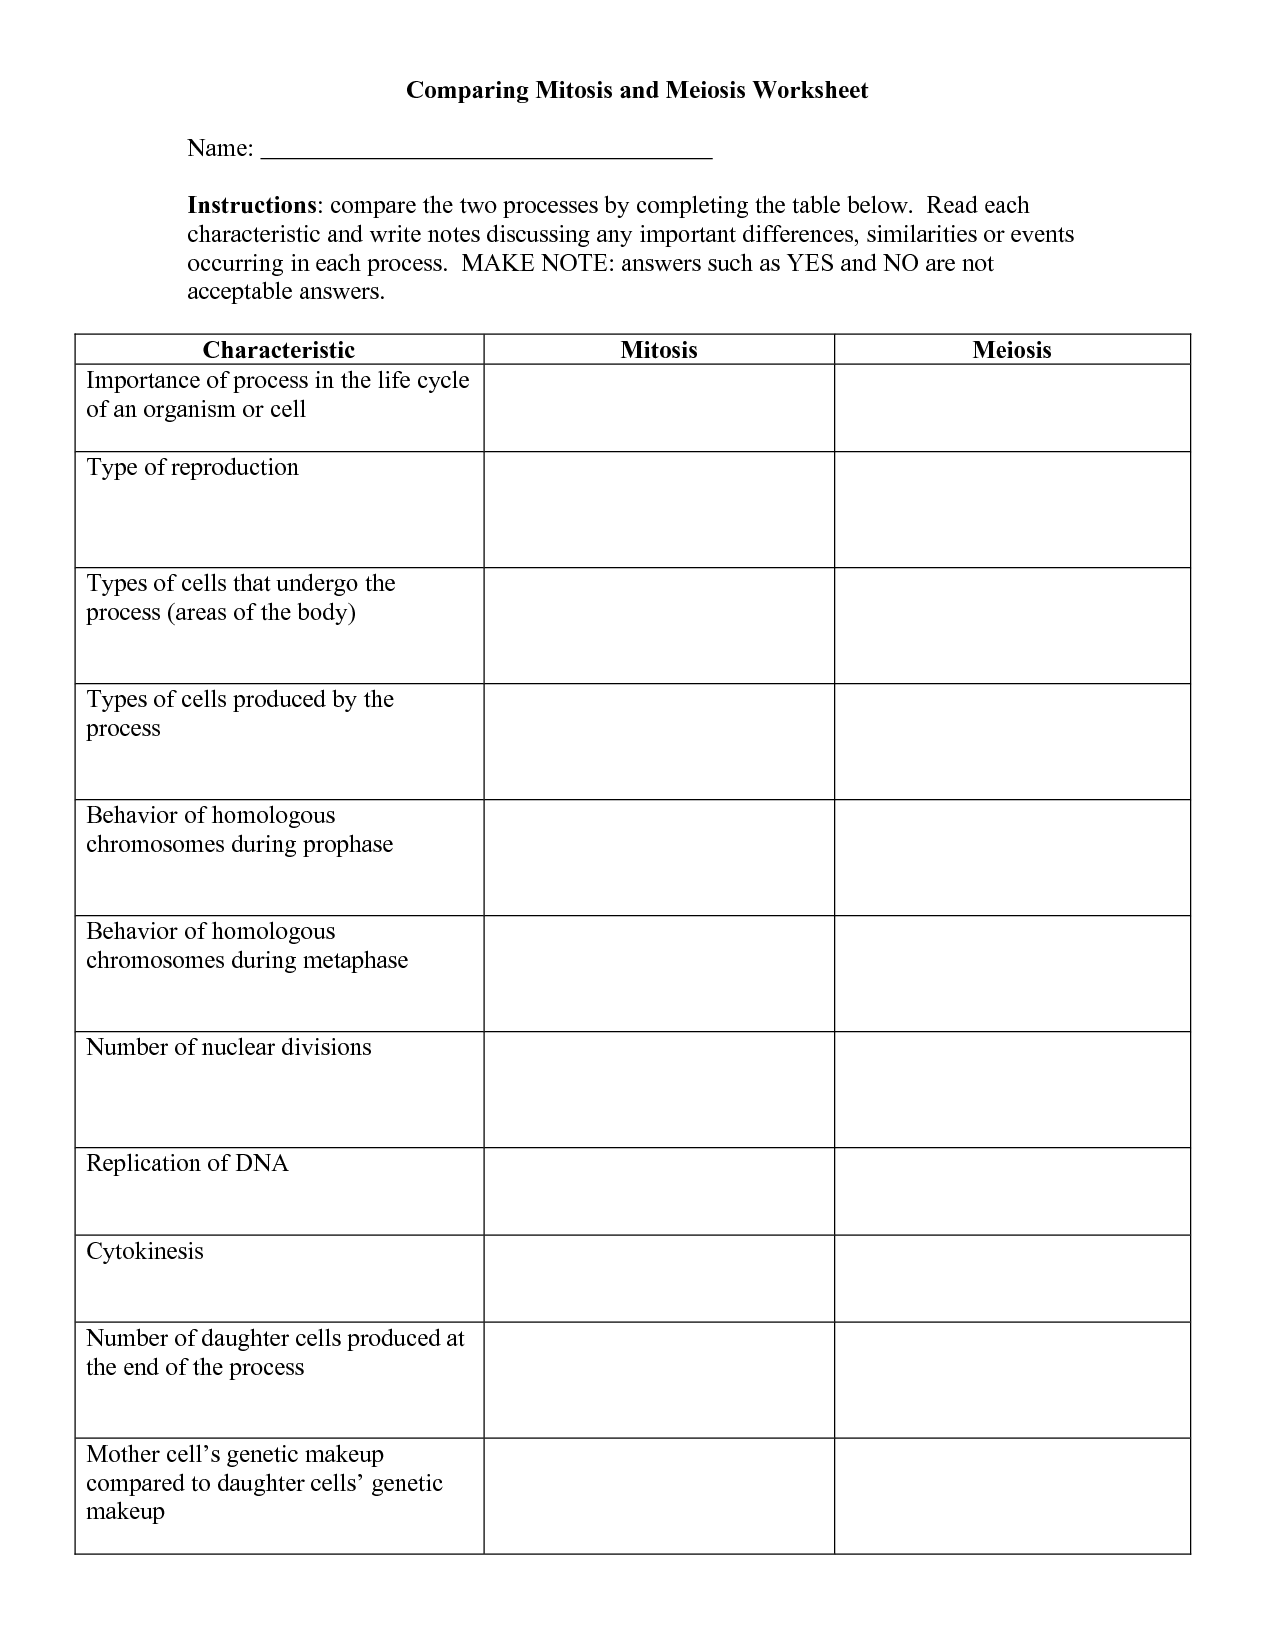 Mitosis And Meiosis Comparison Worksheet Answers